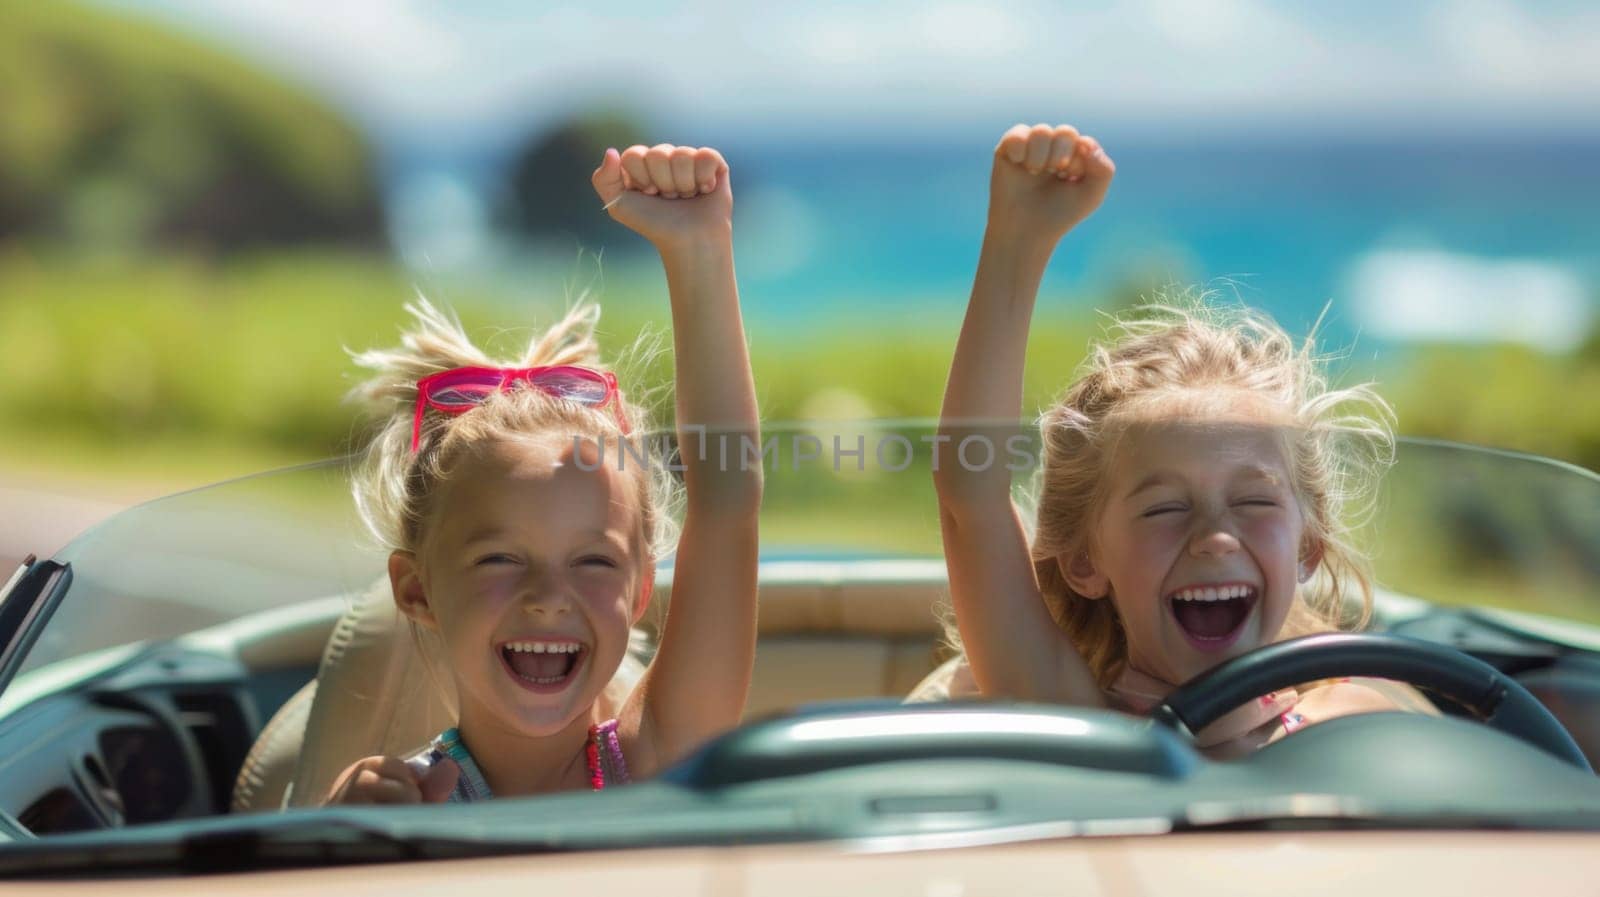 Two little girls in a convertible car with their arms up